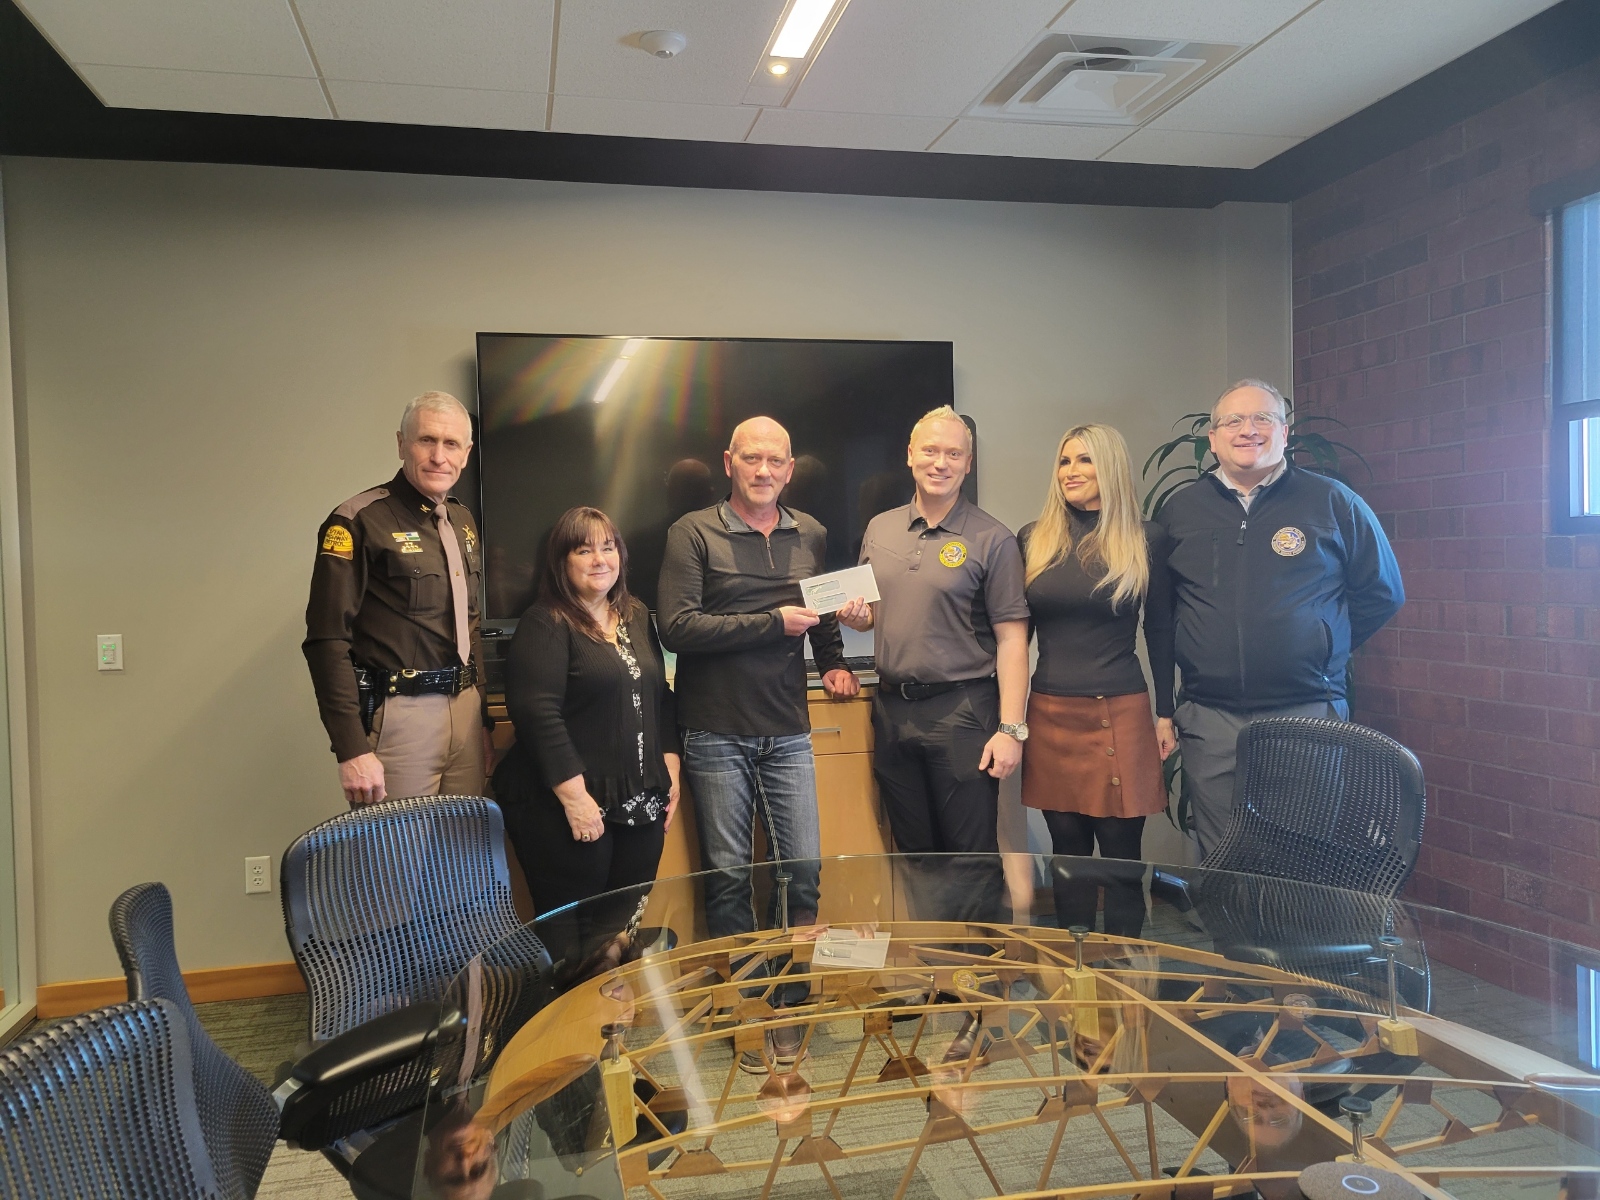 XINSURANCE Supports State Troopers With $50,000 Donation to Honoring Heroes Foundation